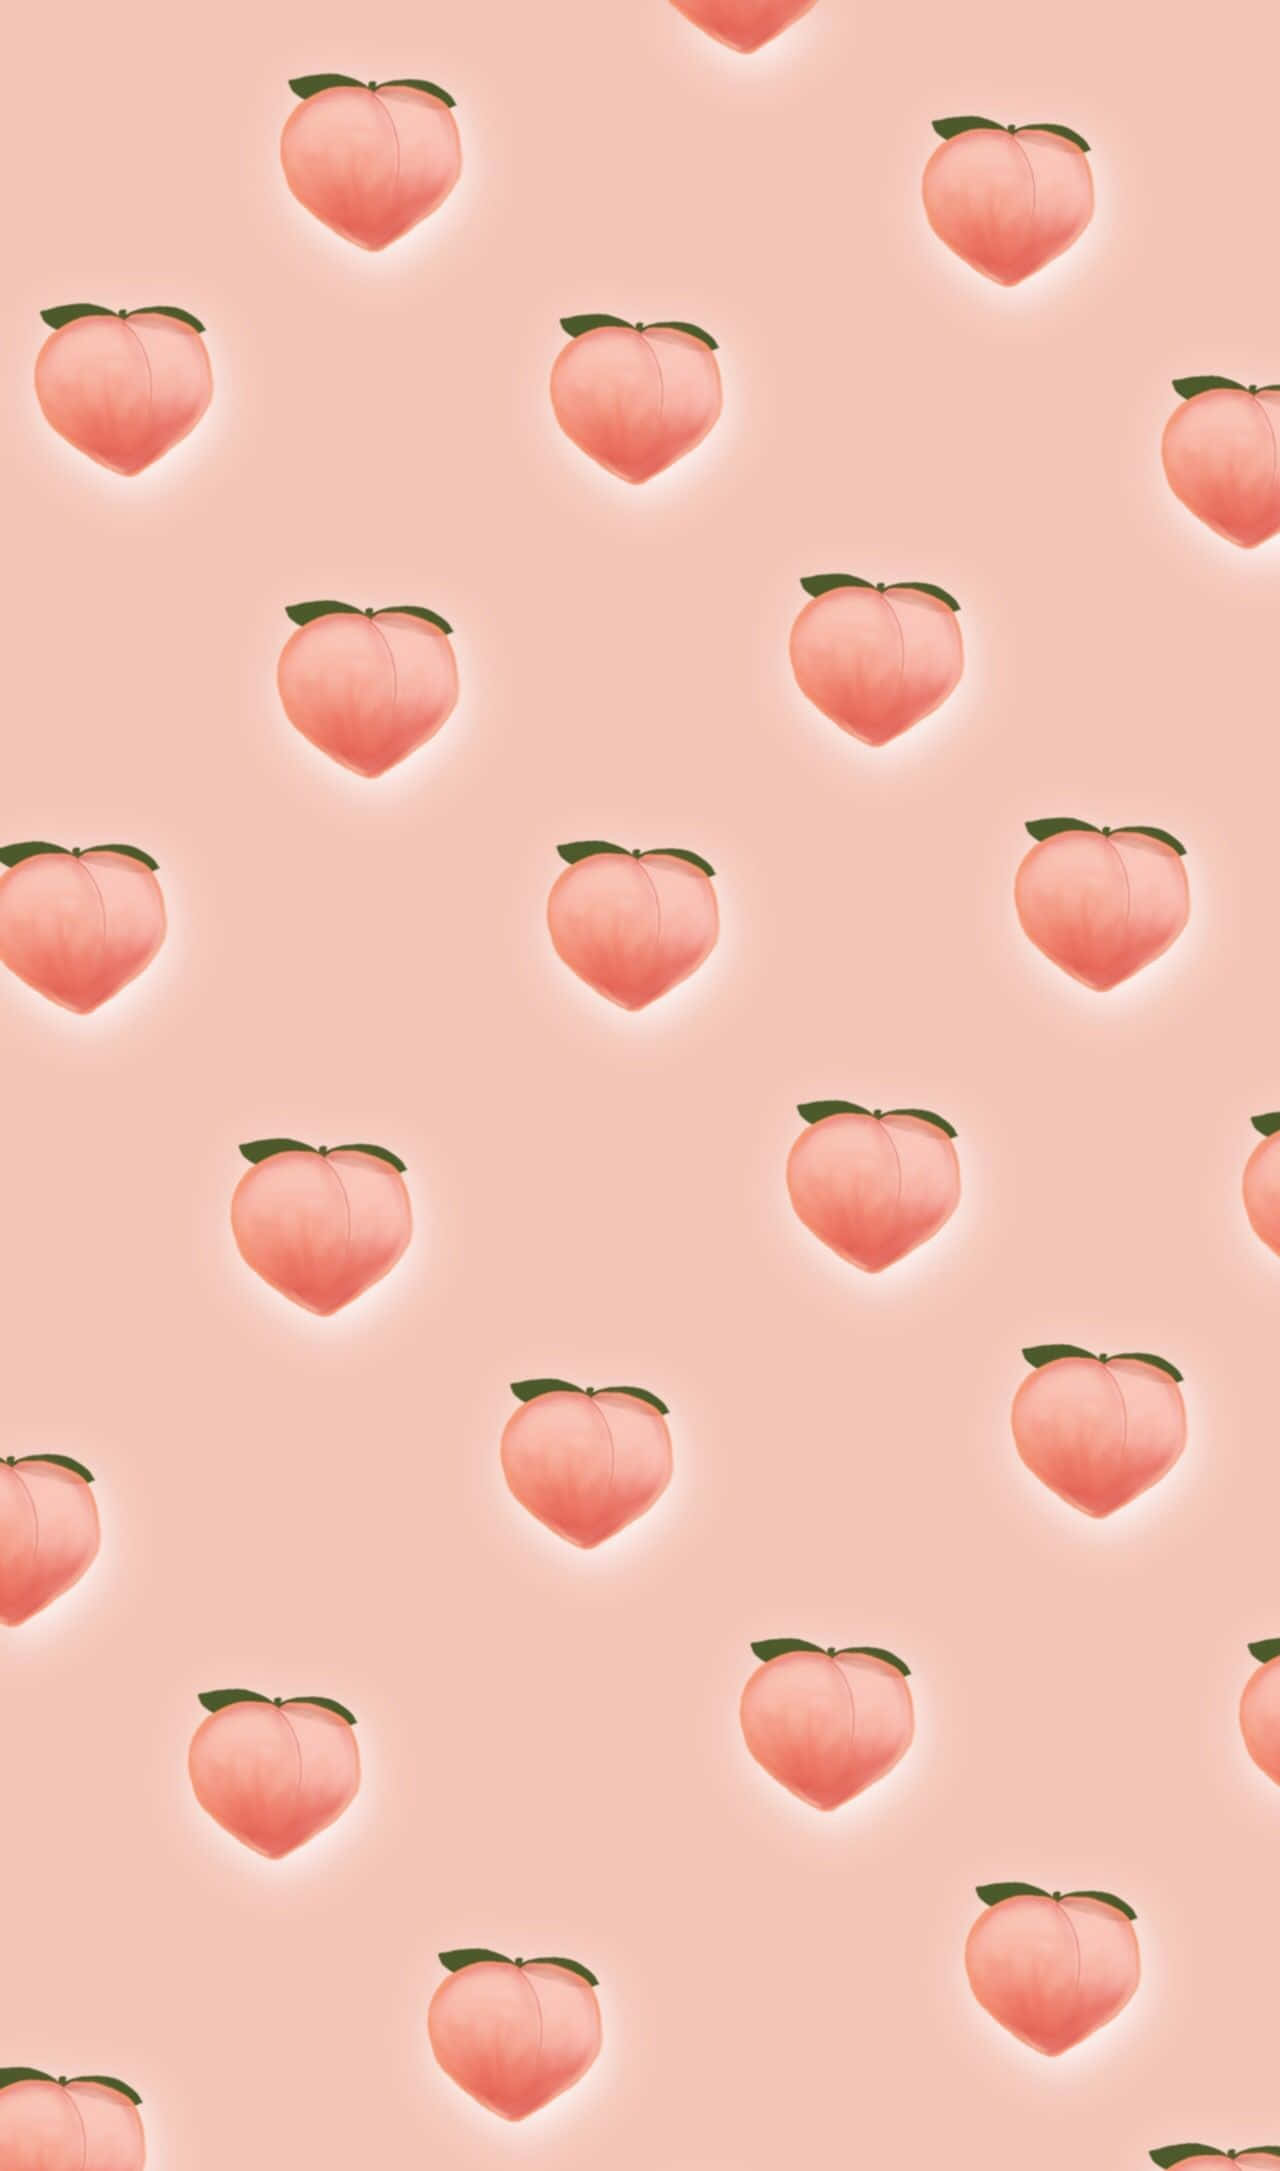 Unlock your creative potential with the new Peach iPhone Wallpaper